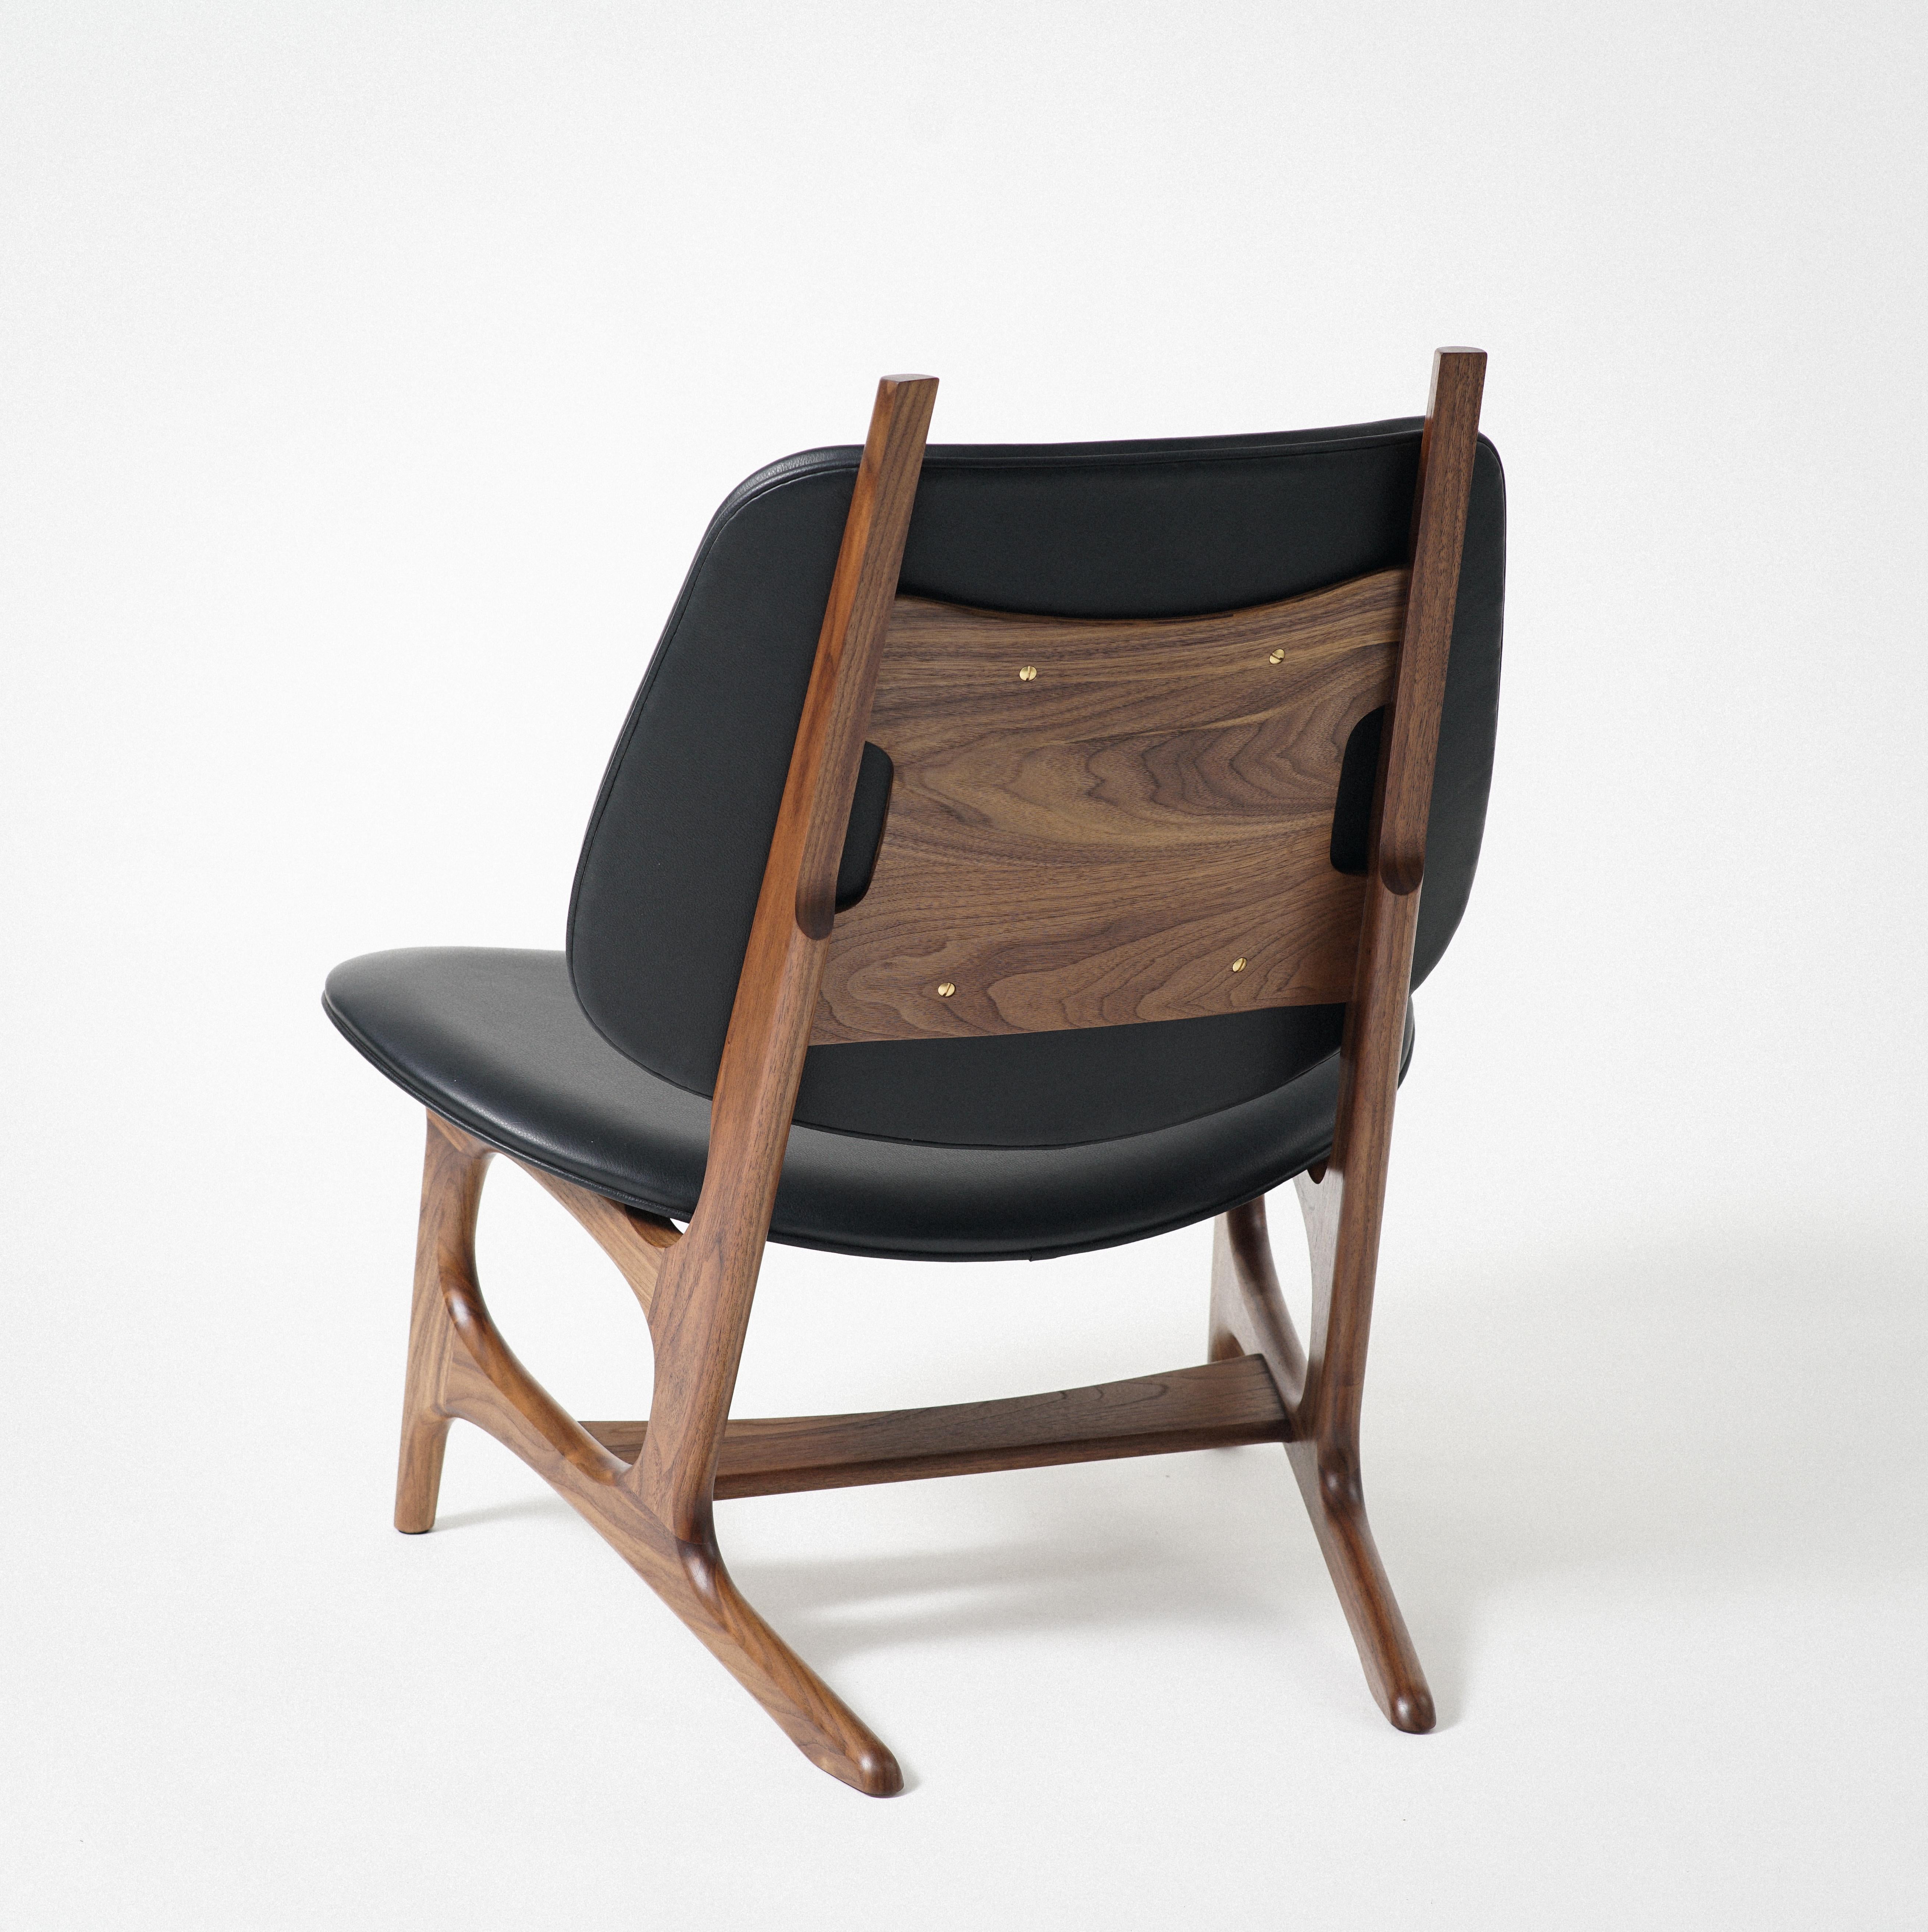 Phloem Studio Francis easy chair is a modern contemporary oversized easy chair with a exposed solid walnut hardwood frame with an upholstered shell seat and back, with wool upholstery. Francis is a roomy easy chair for drinking Americanos or wine,